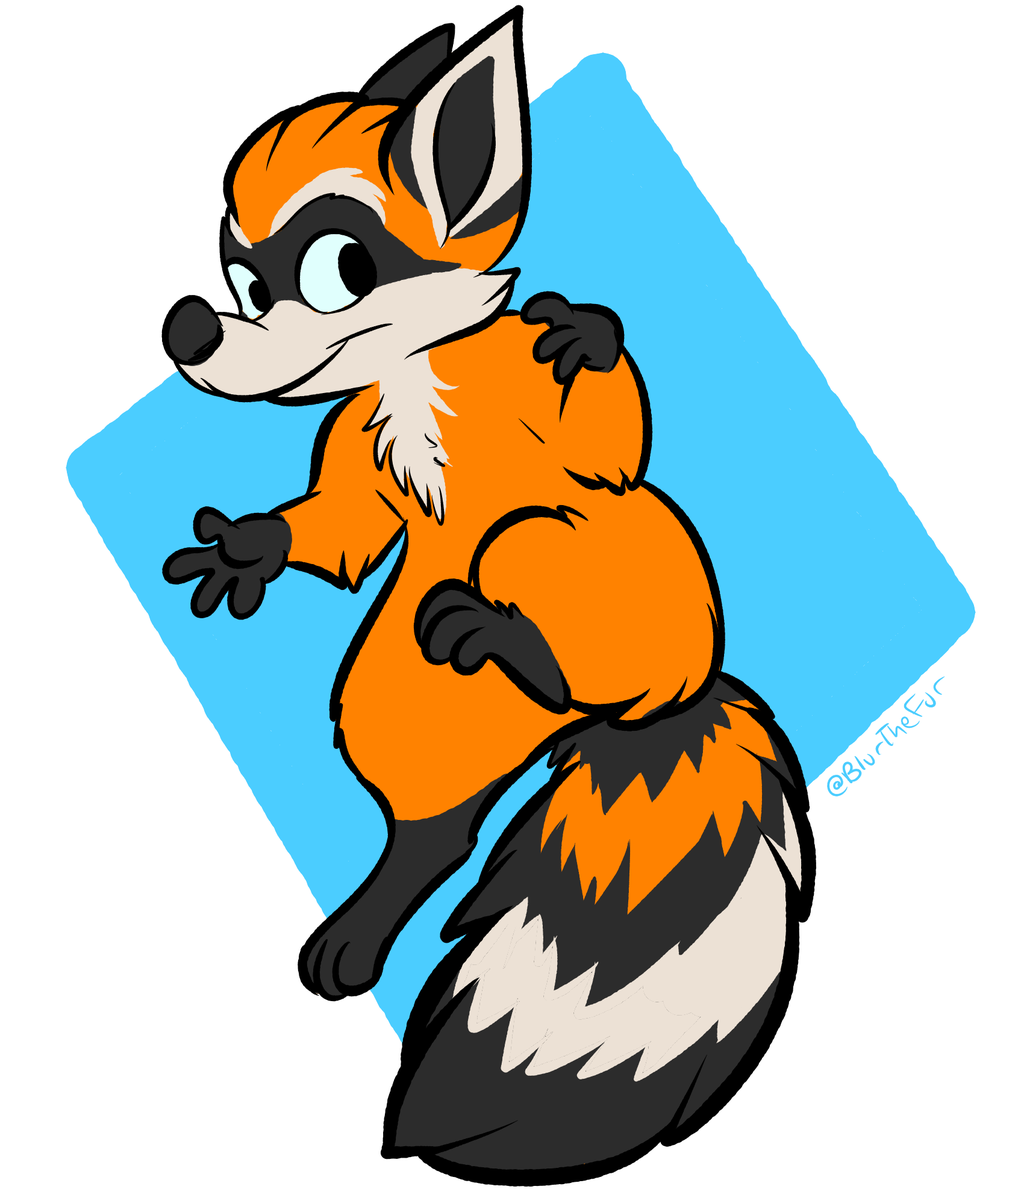 Daily Doodle #97 - Foxcoon